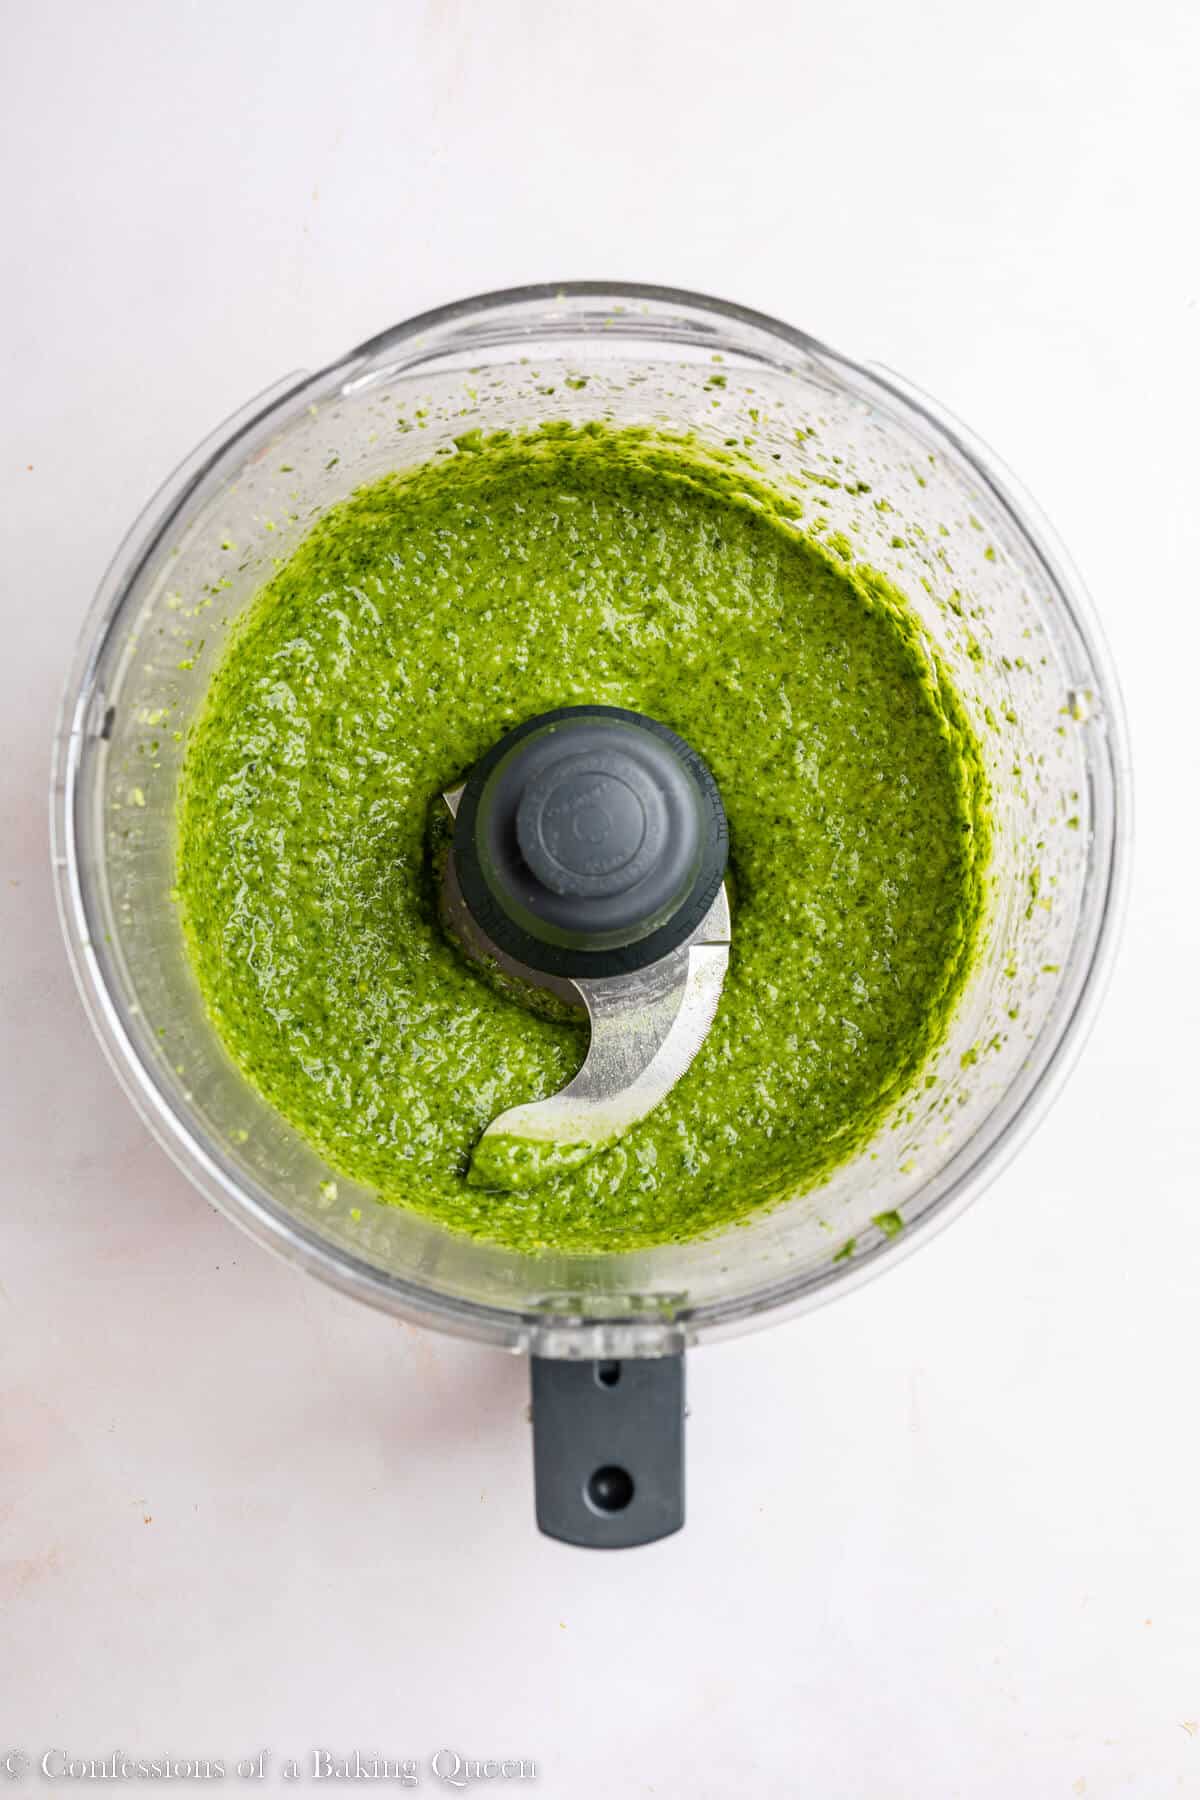 basil pesto made in a food processor on a light surface